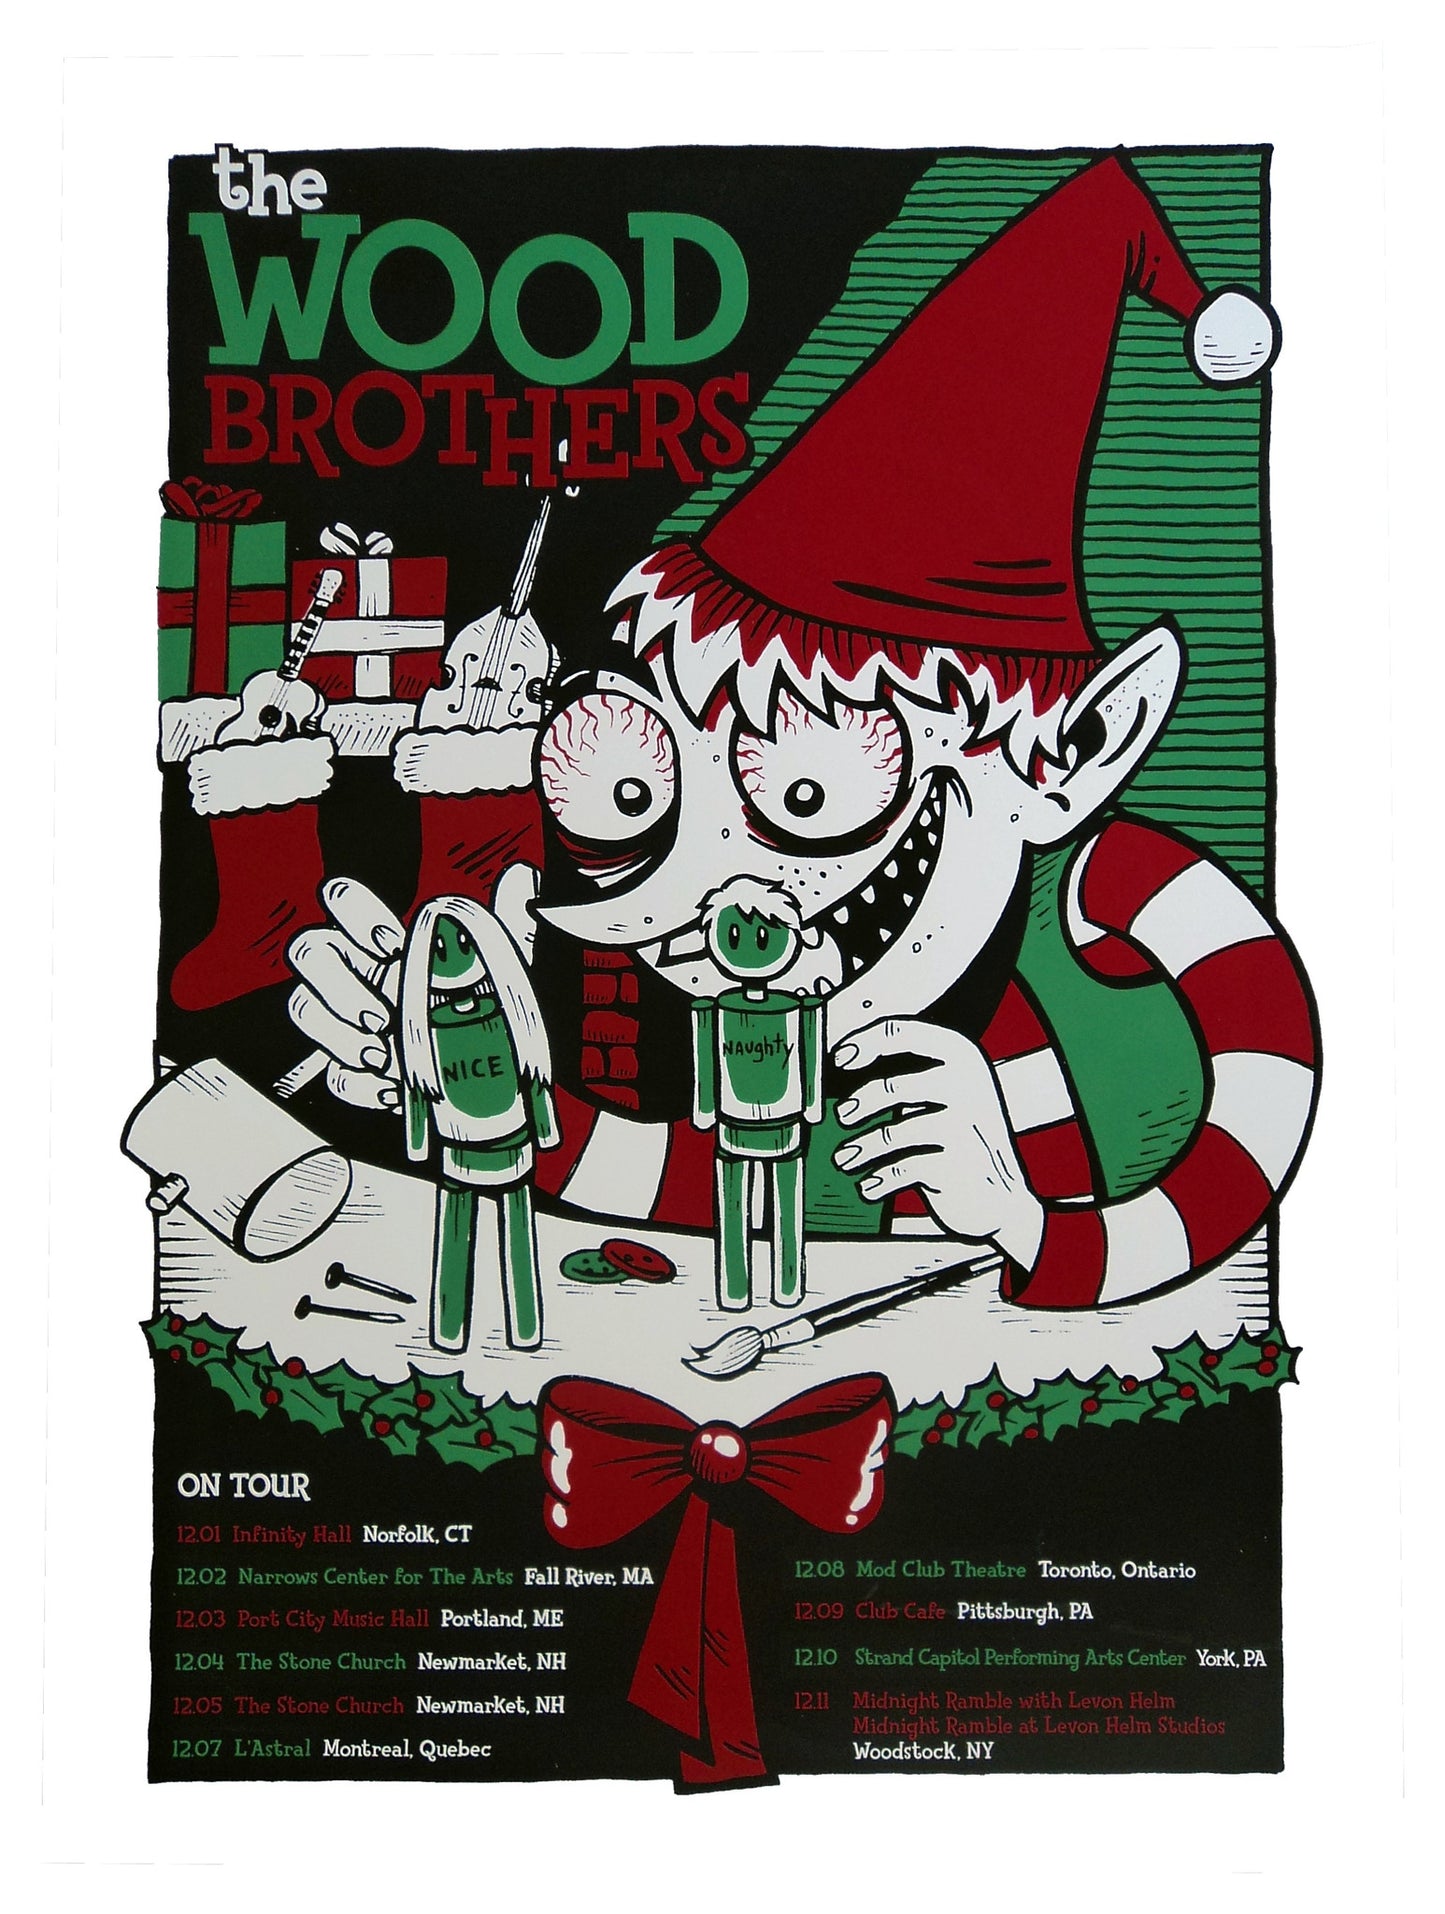 Lonny Unitus - 2010 - The Wood Brothers December Tour Concert Poster